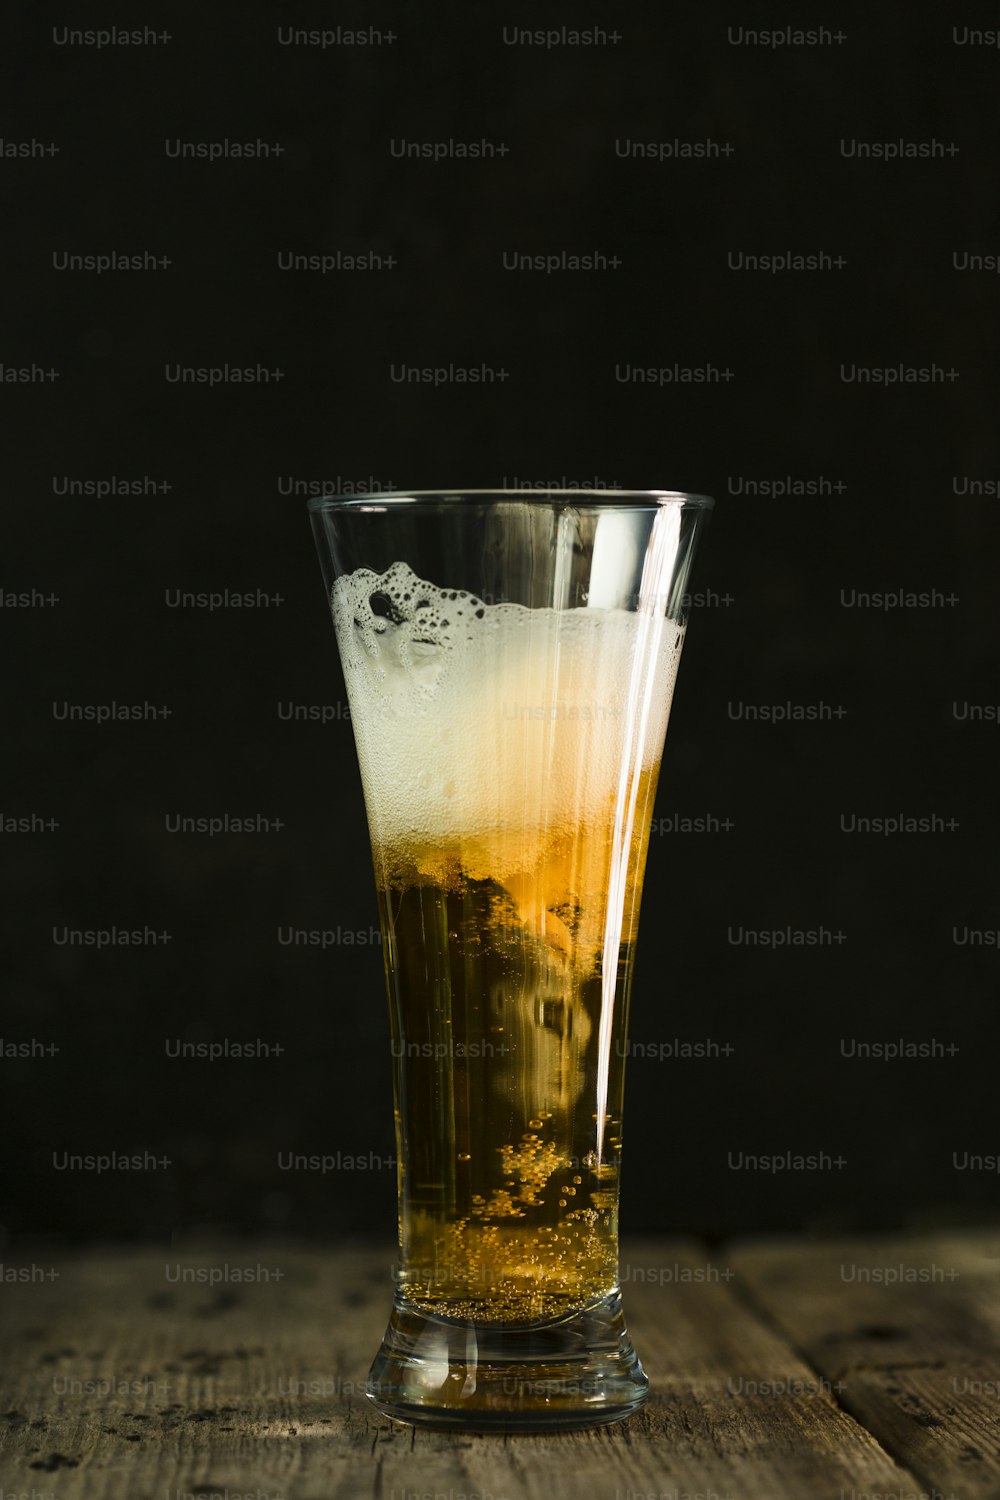 a glass filled with liquid sitting on top of a wooden table